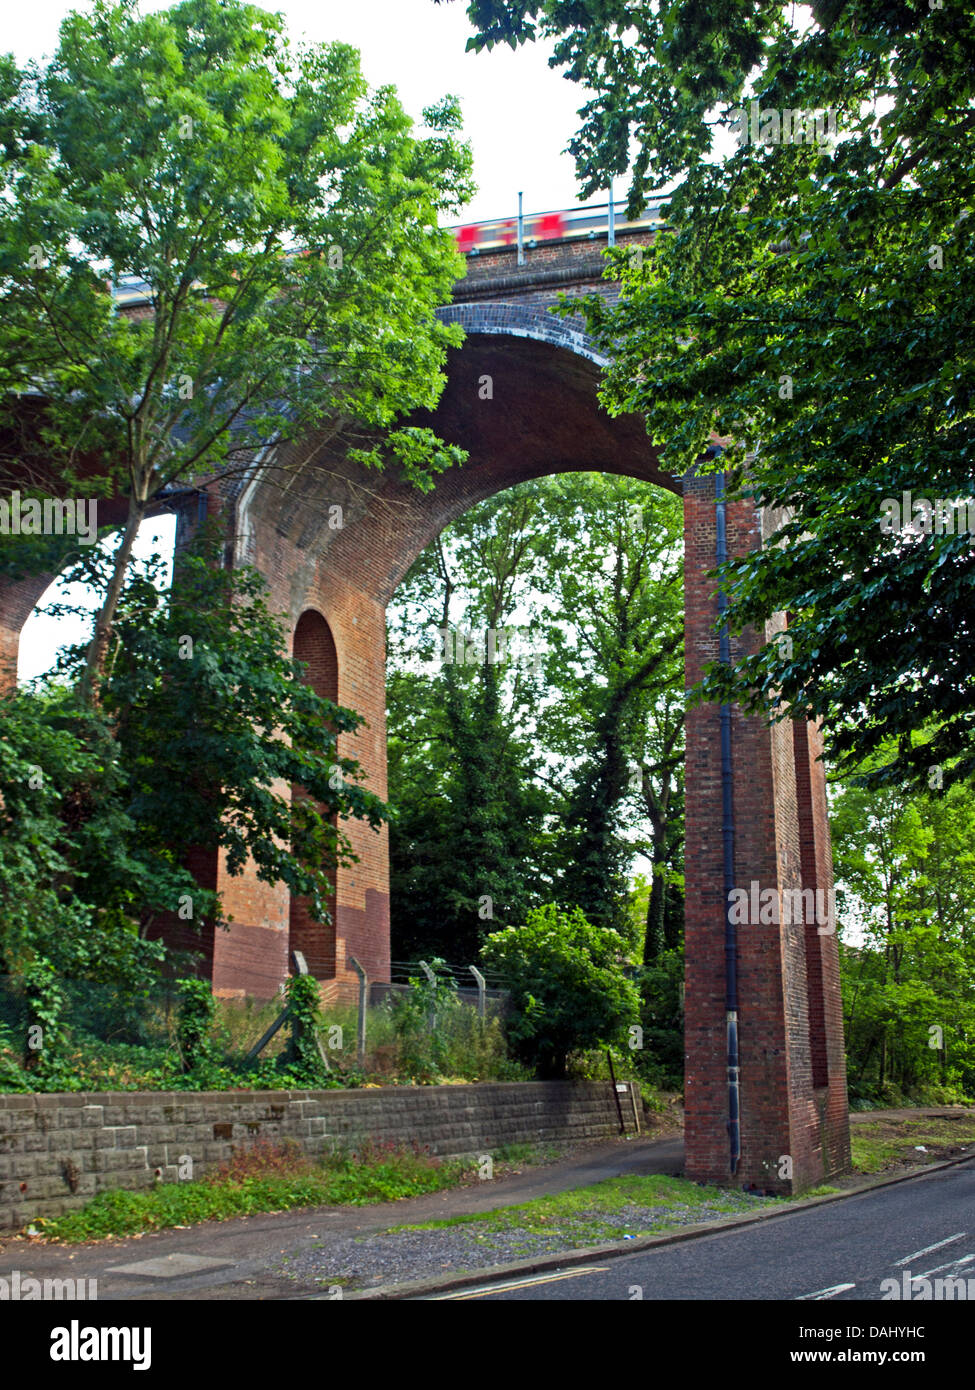 View of Dollis Brook Viaduct, the highest point on the London Underground network showing the Northern Line in transit Stock Photo